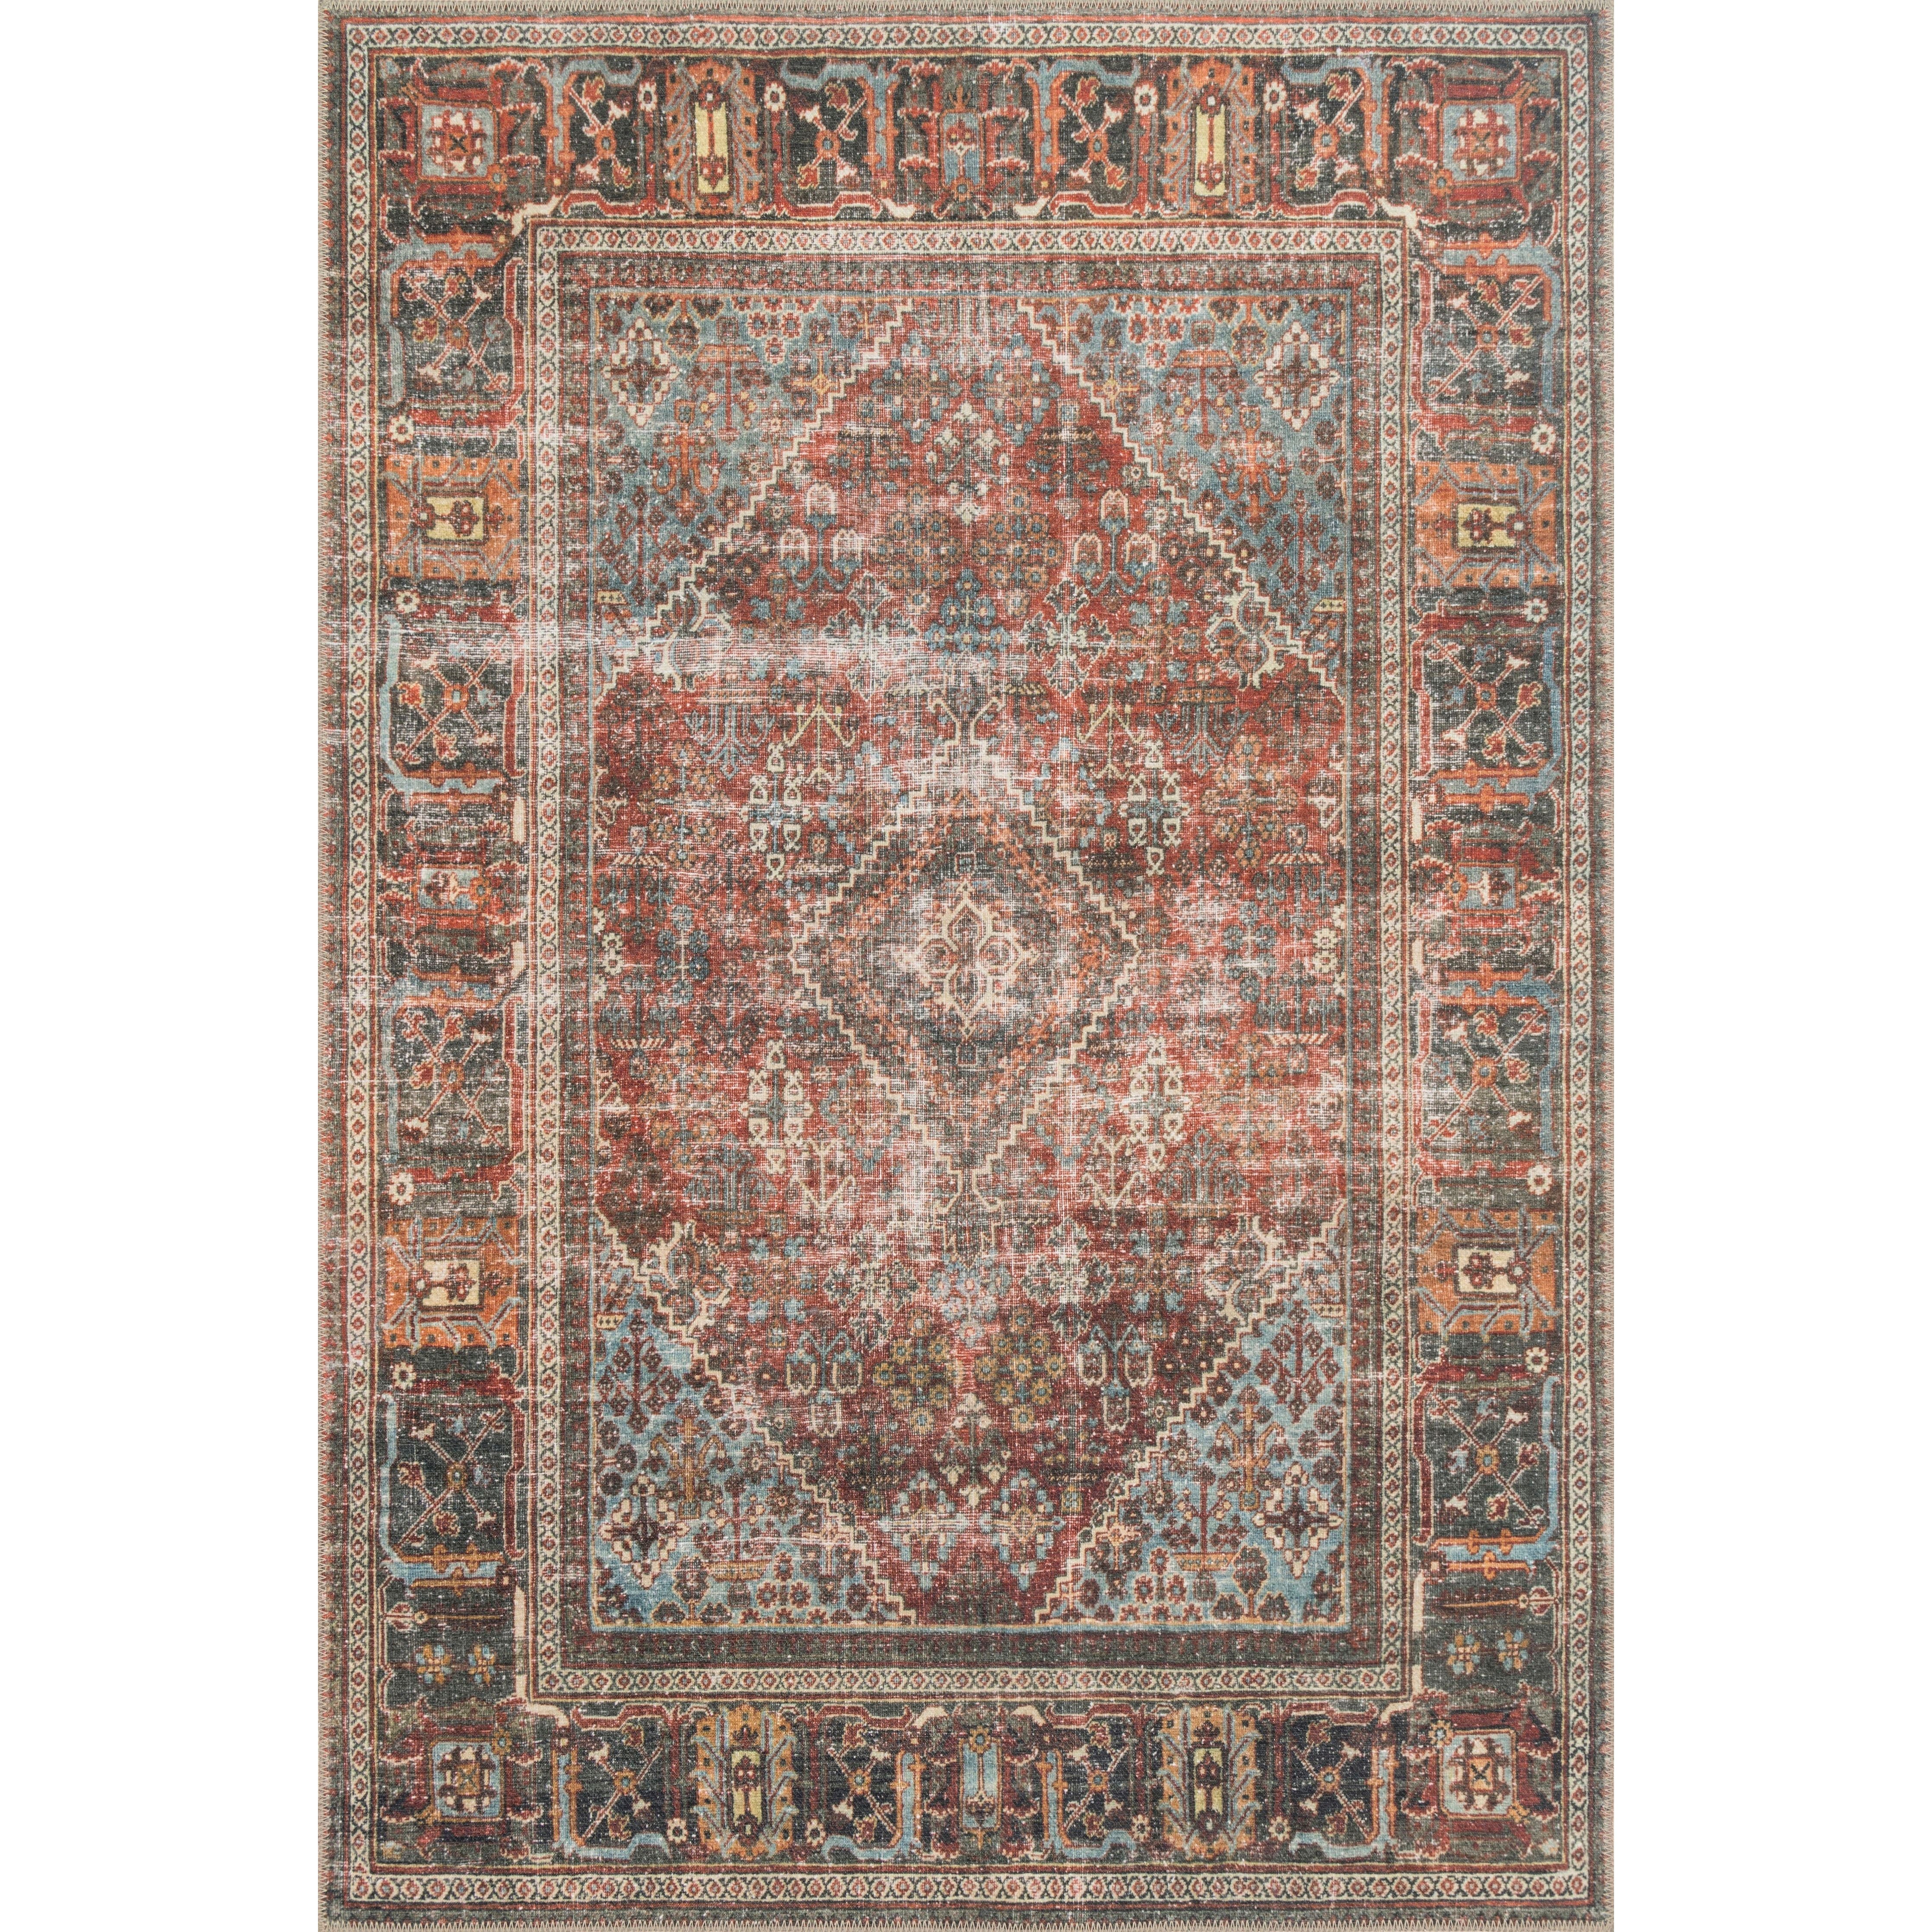 The Loloi Loren Brick / Multi Area Rug, or LQ13, offers vintage hand-knotted looks at an affordable price. This power loomed rug is perfect for living rooms, dining rooms, or other high traffic areas. These printed designs provide a textured effect by portraying every single individual knot on a soft polyester base.